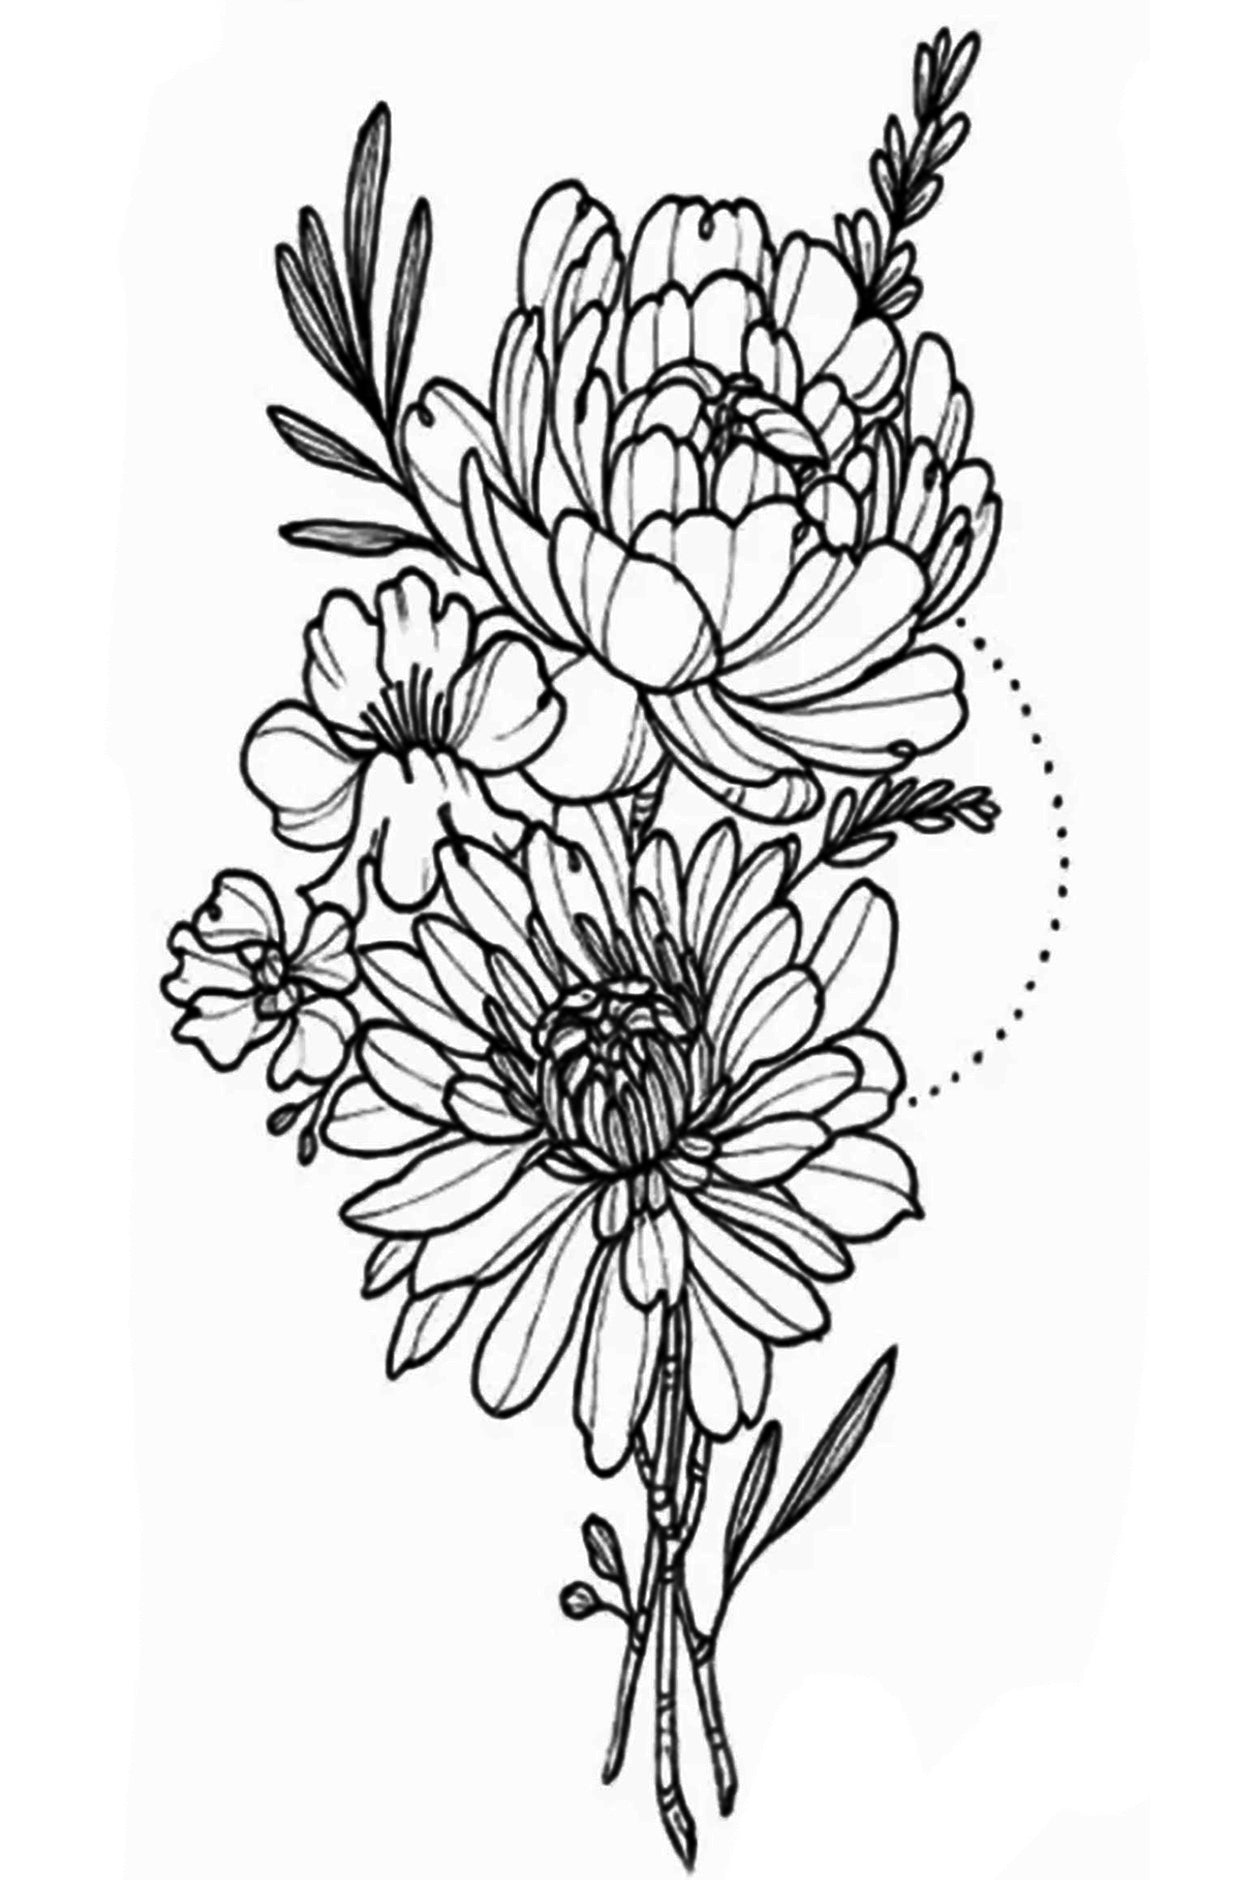 Giant chrysanthemums are coming into full bloom in a delicate artistic spray. This tag is done in the traditional tattoo-ink look for maximum realism. Lovingly referred to as the queen of the fall flowers, the “mum” is symbolic for many reasons. Mums symbolize joy, life, friendship, luck, and rebirth. Part of the flower's beauty is its resilience in a sudden environmental change.